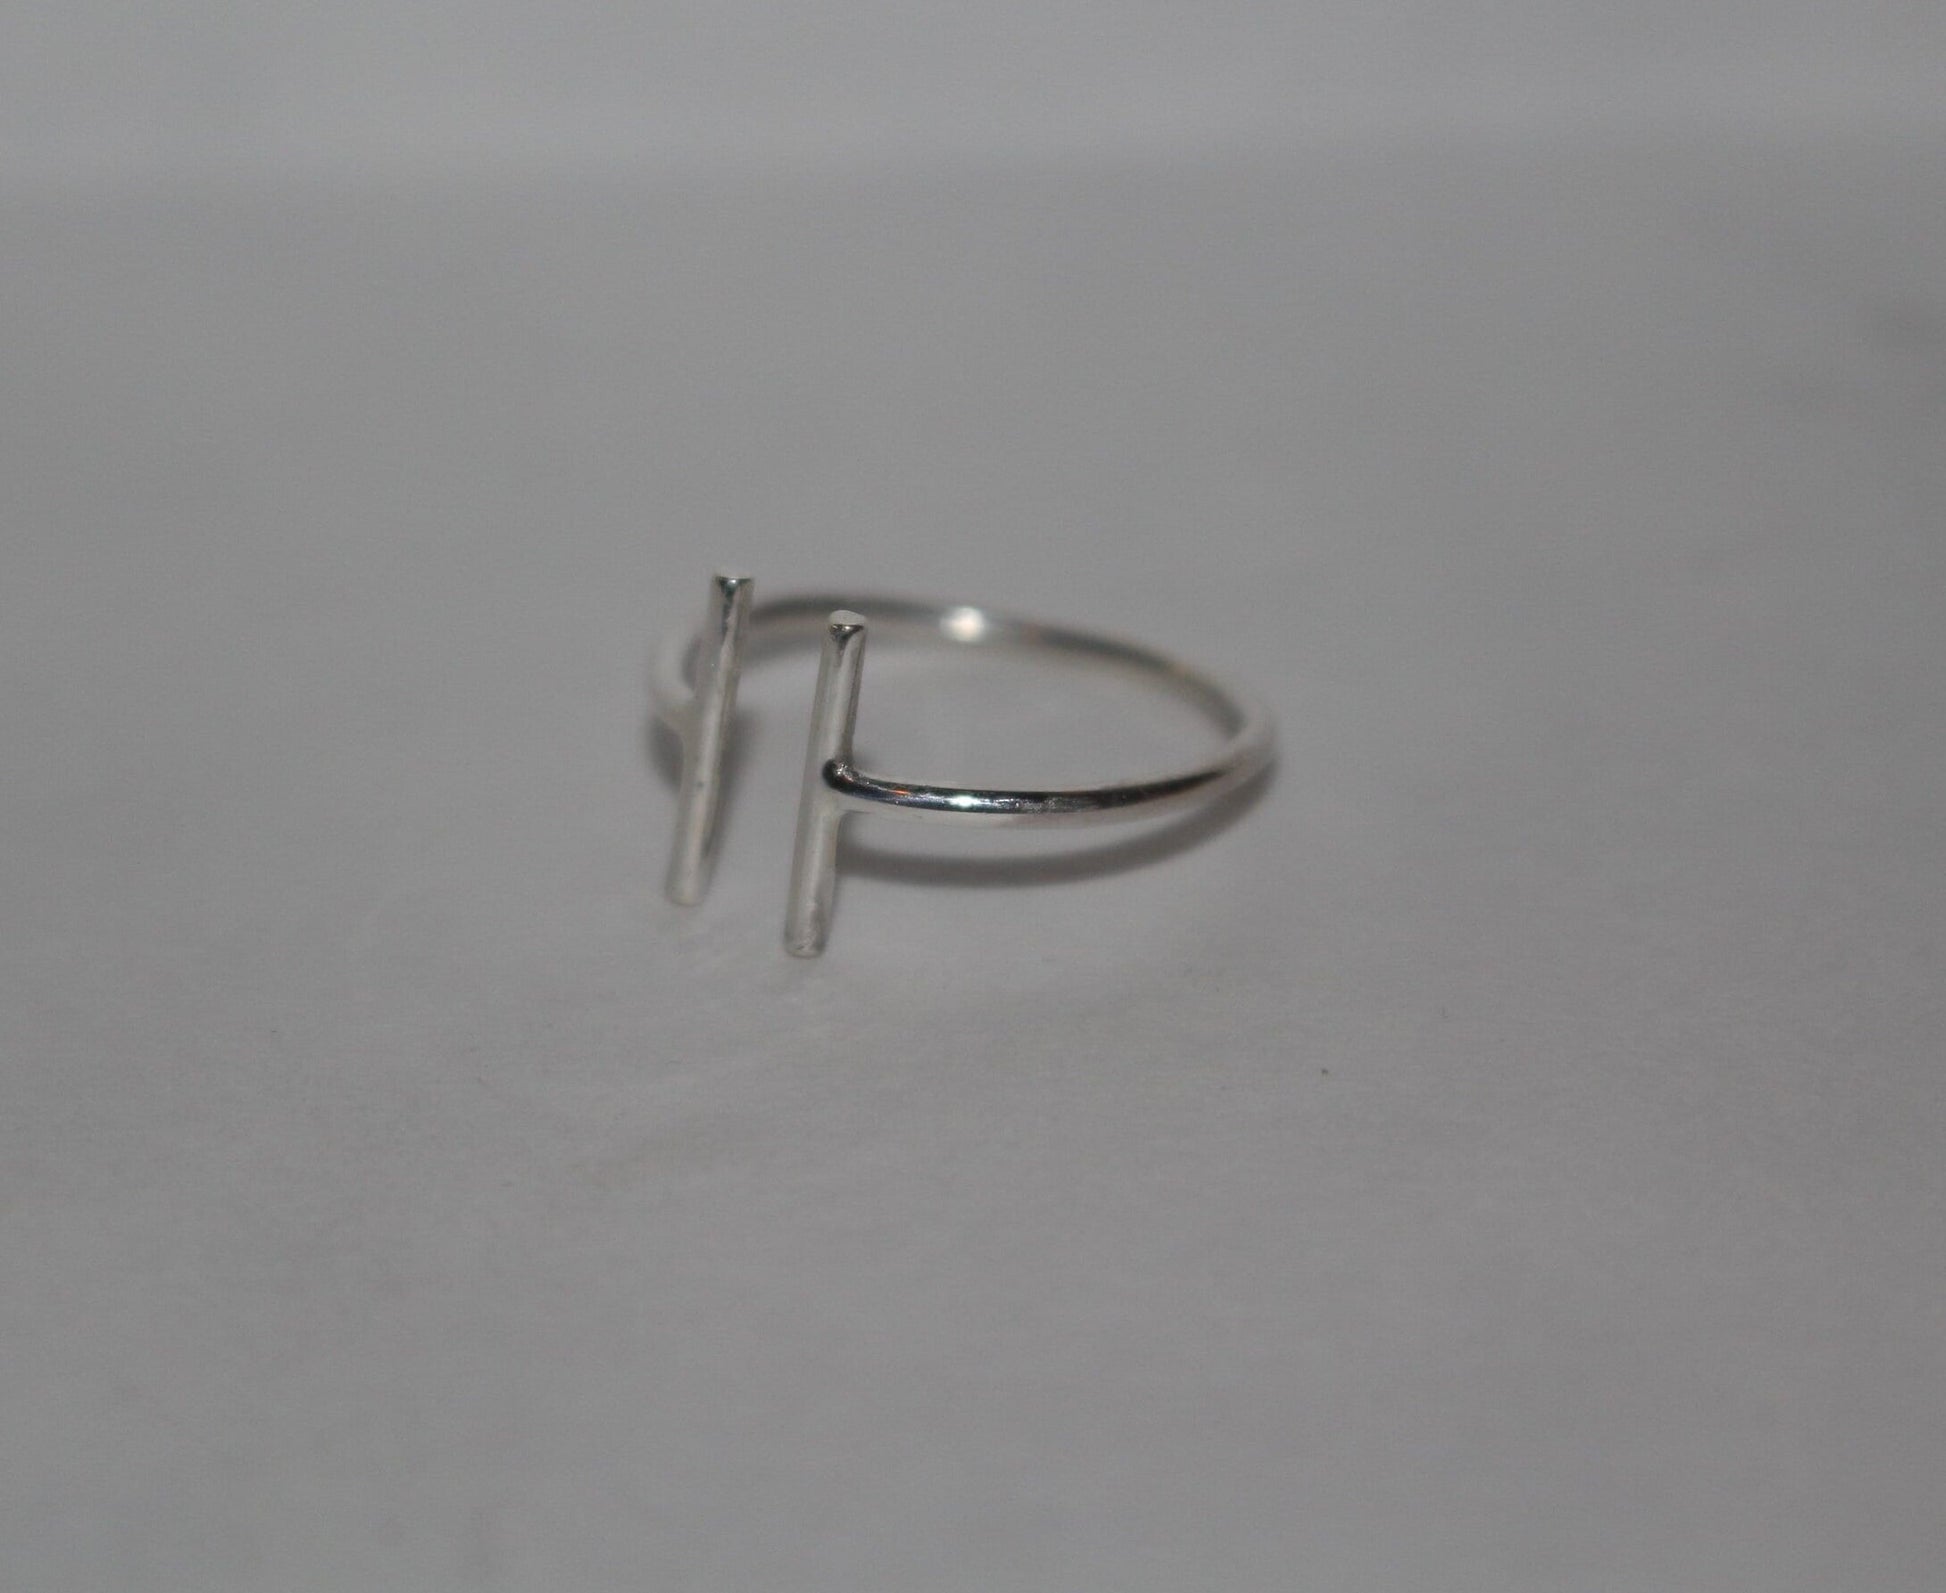 Round T-Bar Ring - Available in Sterling Silver and 14k Gold Fill